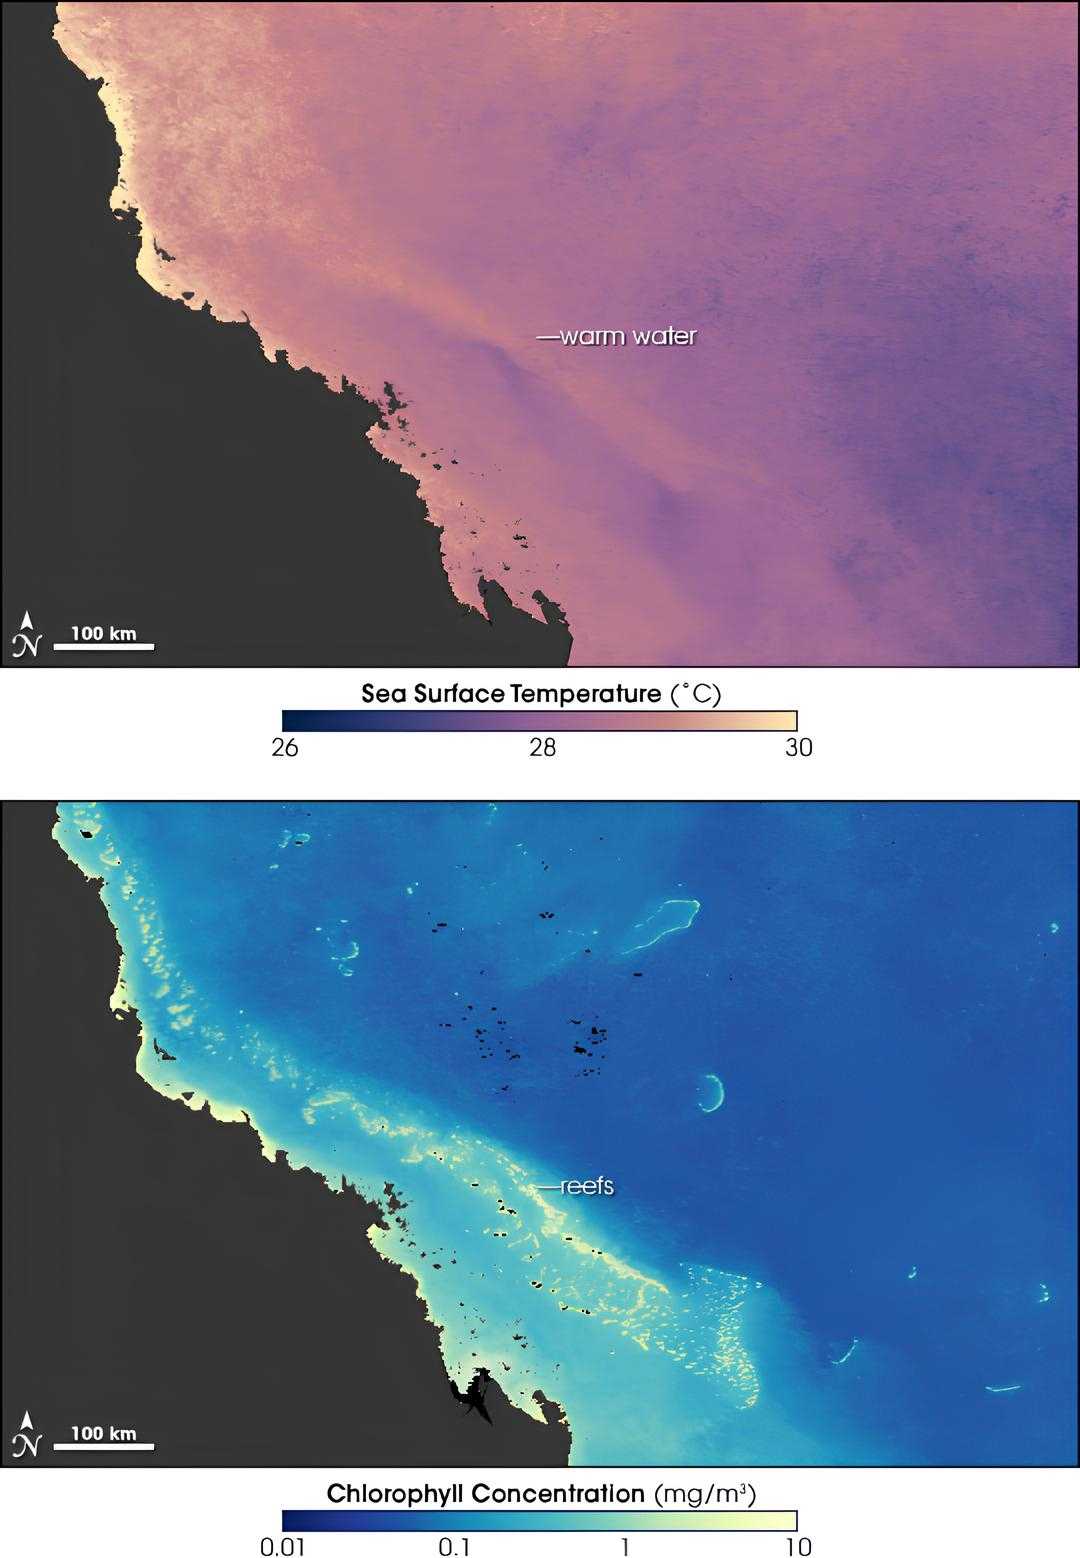 The two images of the Great Barrier Reef, with the warmest water (upper picture) matching the coral reefs (lower picture), establish the conditions that could contribute to coral bleaching.